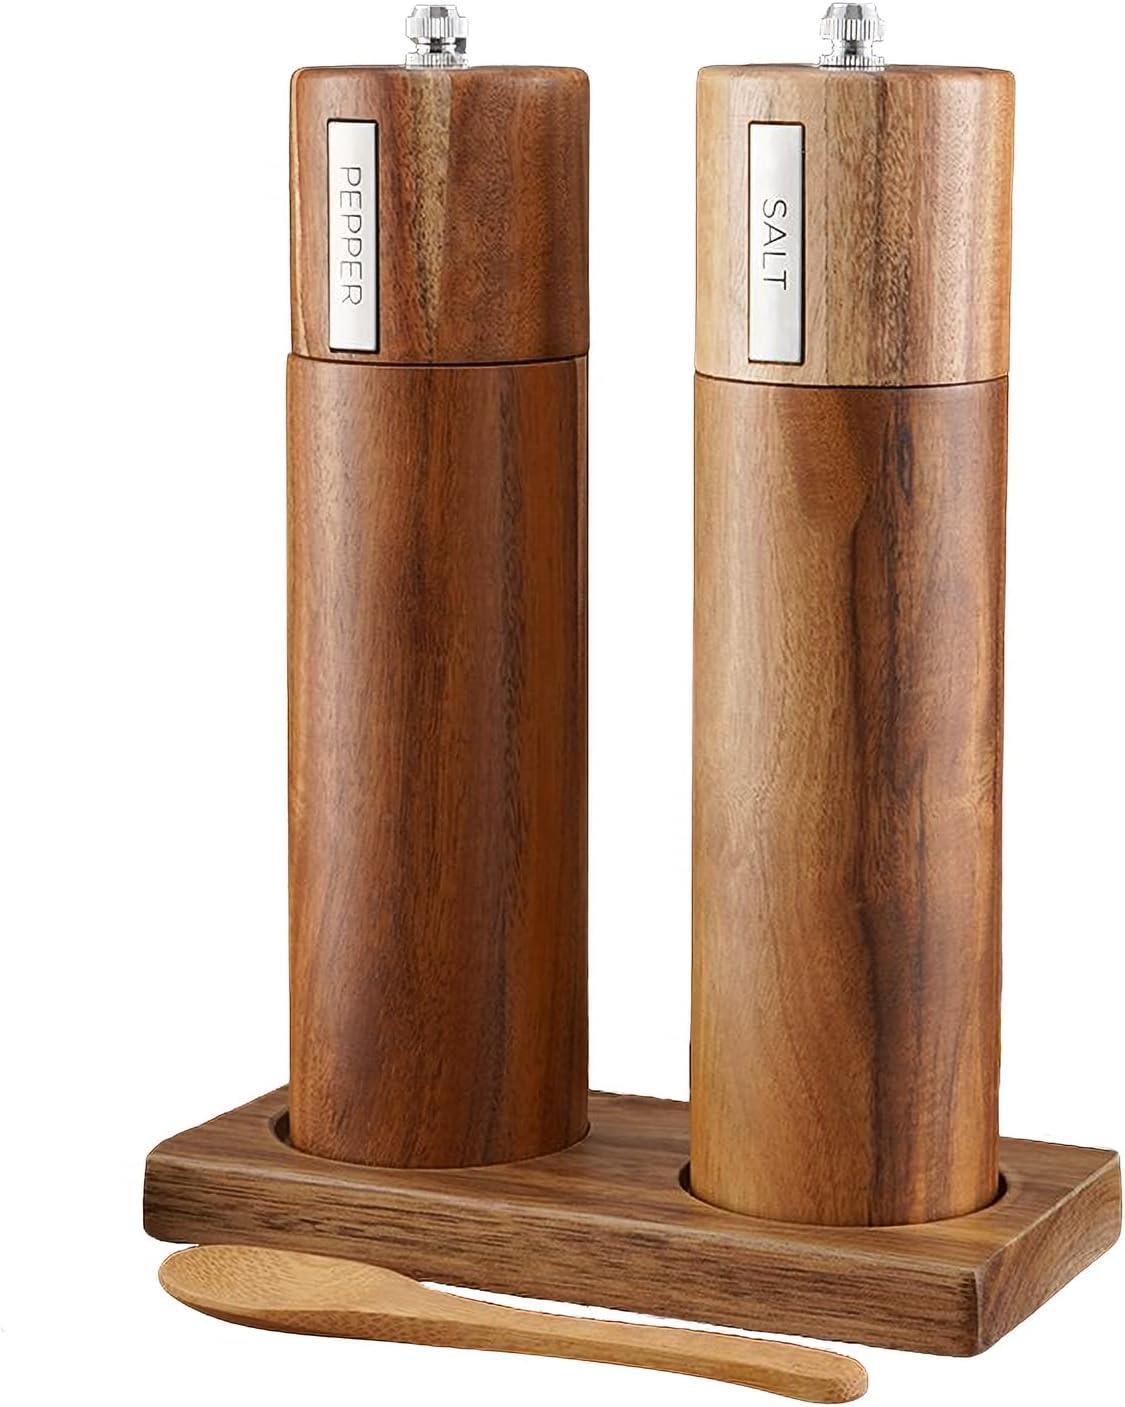 Wooden Salt and Pepper Grinder Set with Tray and Spoon - Kitchen Hand Grinder